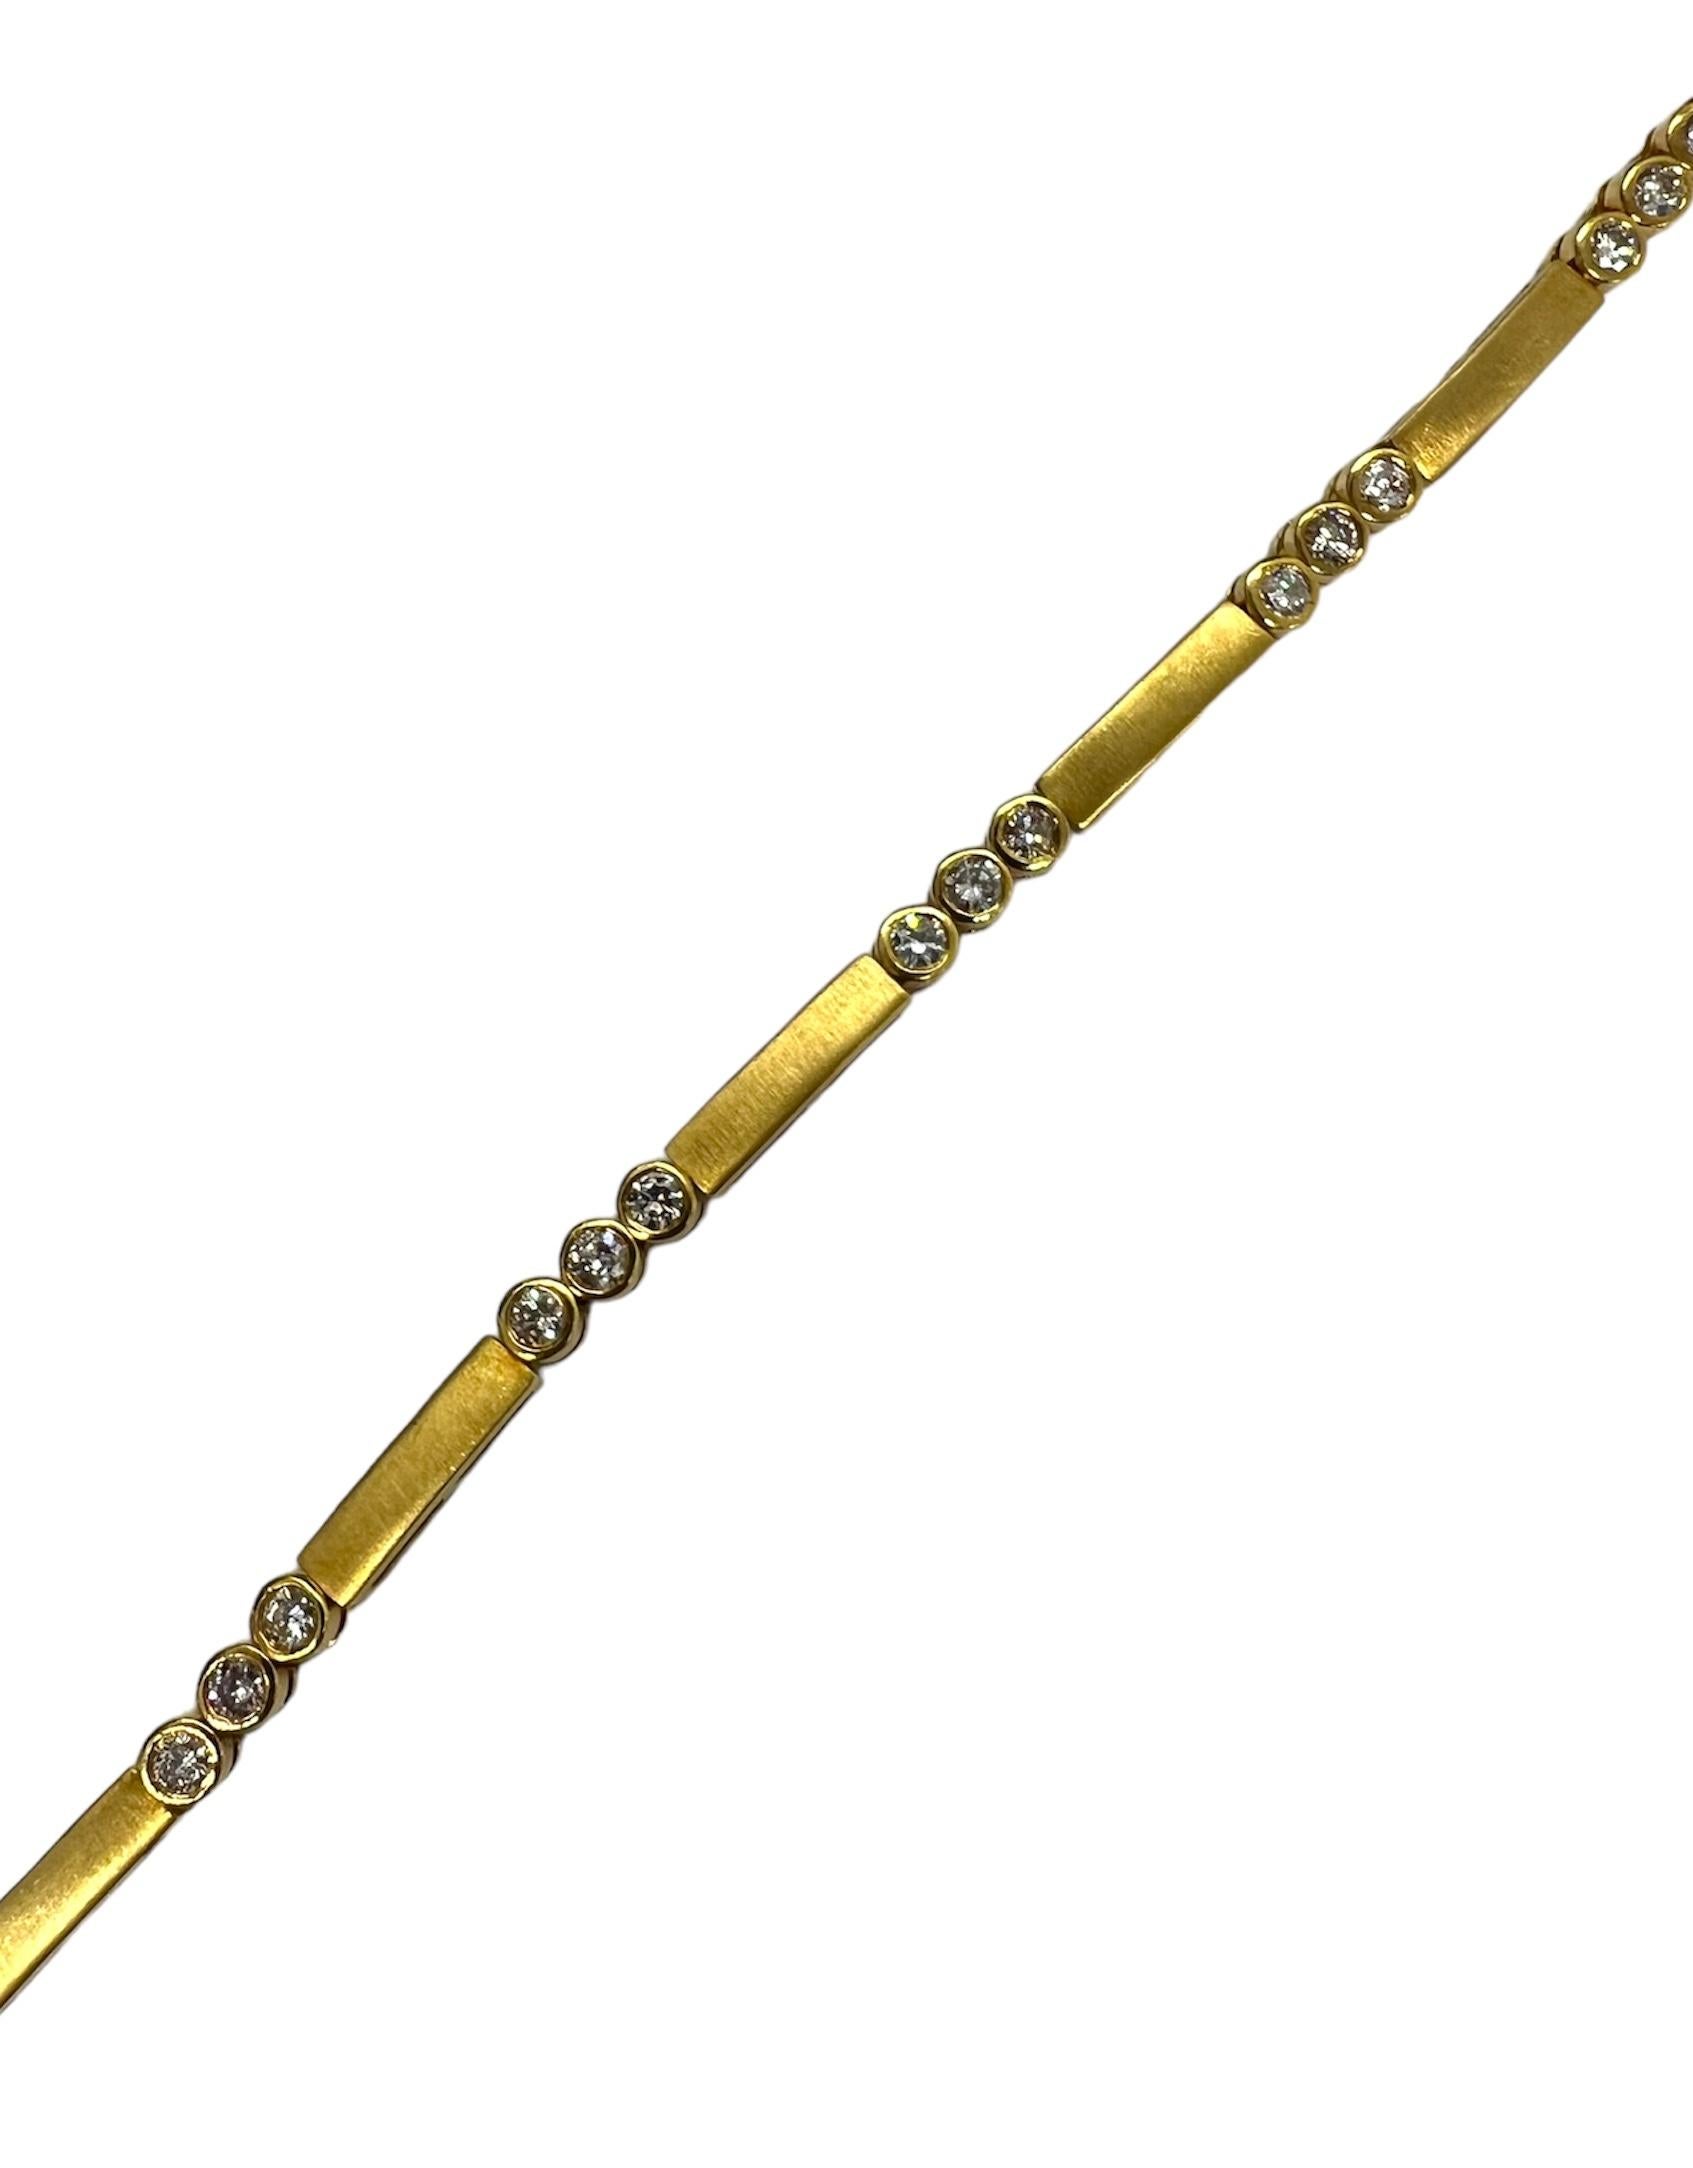 14K yellow gold bracelet with round diamonds.

Sophia D by Joseph Dardashti LTD has been known worldwide for 35 years and are inspired by classic Art Deco design that merges with modern manufacturing techniques.